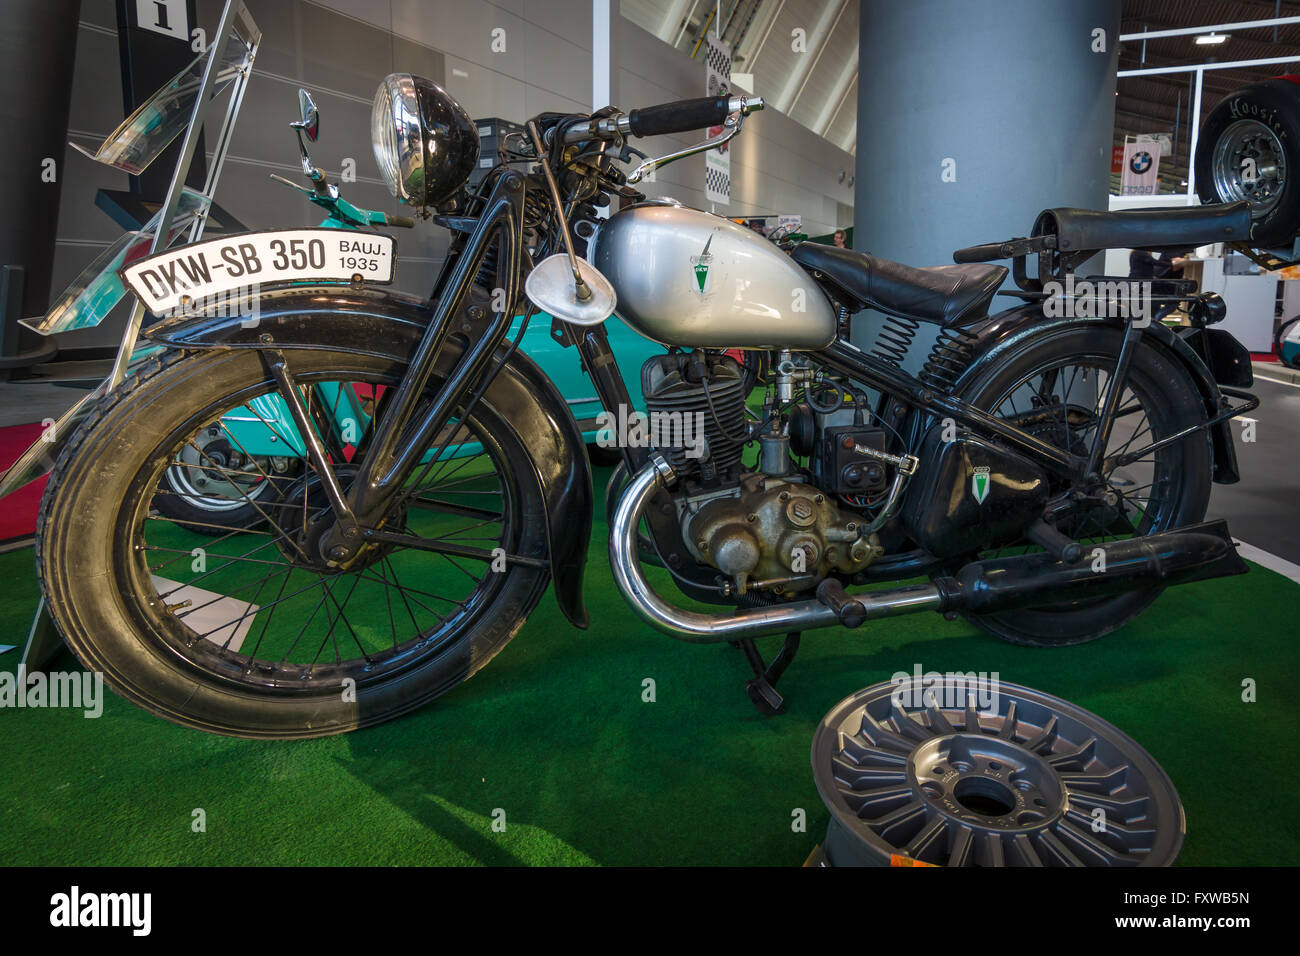 Dkw sb hi-res stock photography and images - Alamy